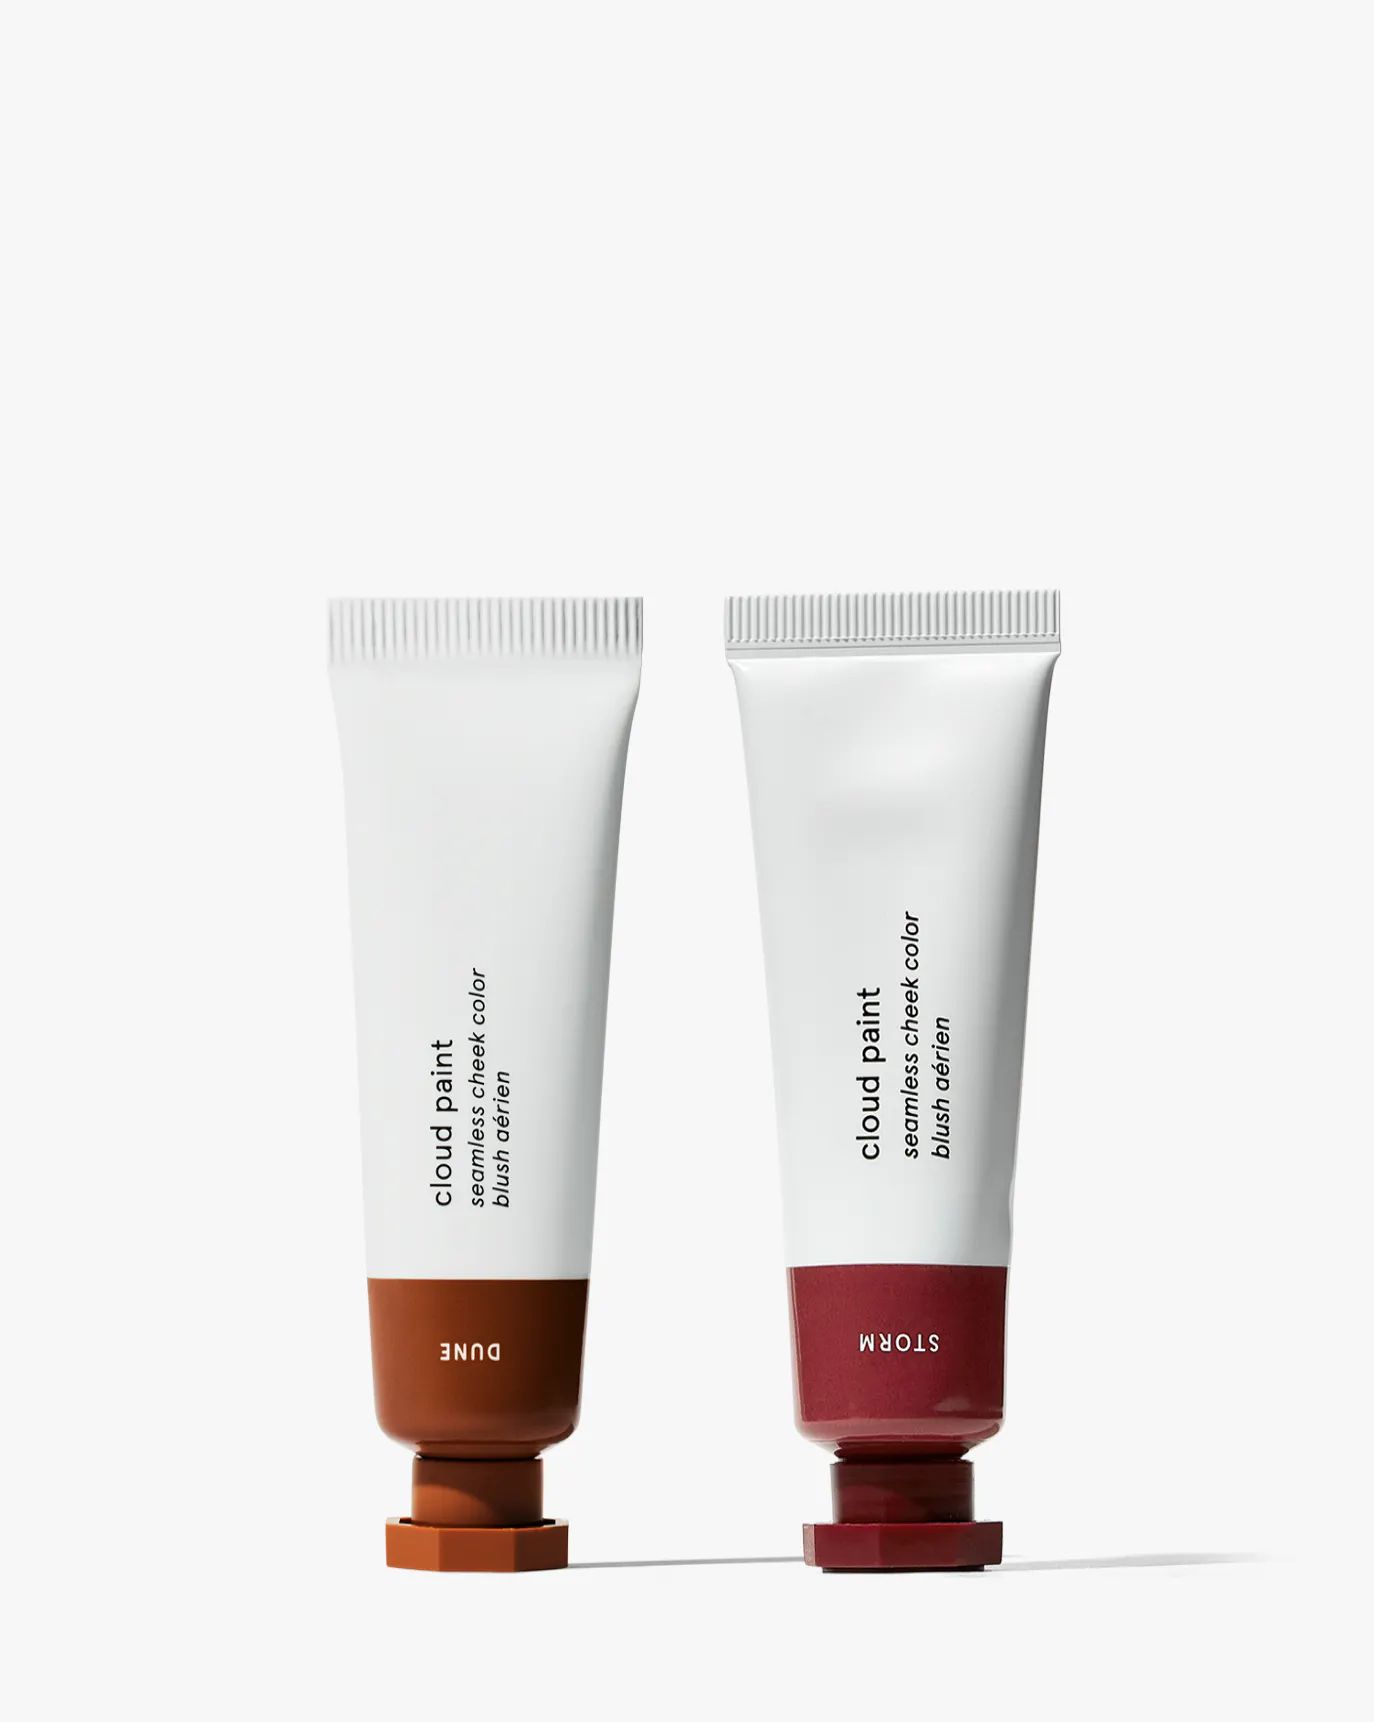 Cloud Paint Duo | Glossier